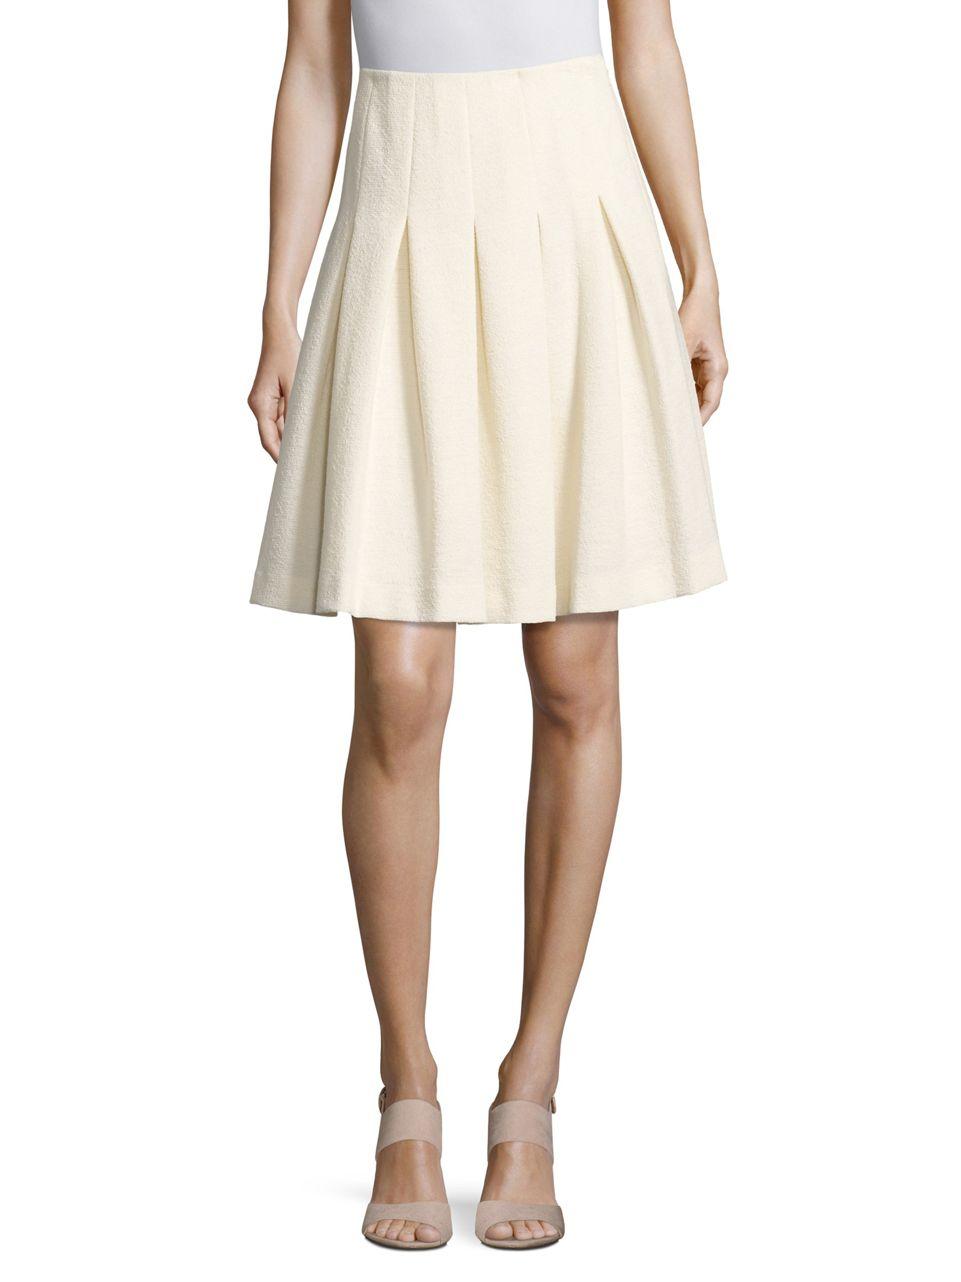 Lyst - Tommy Hilfiger Pleated A-line Skirt in White